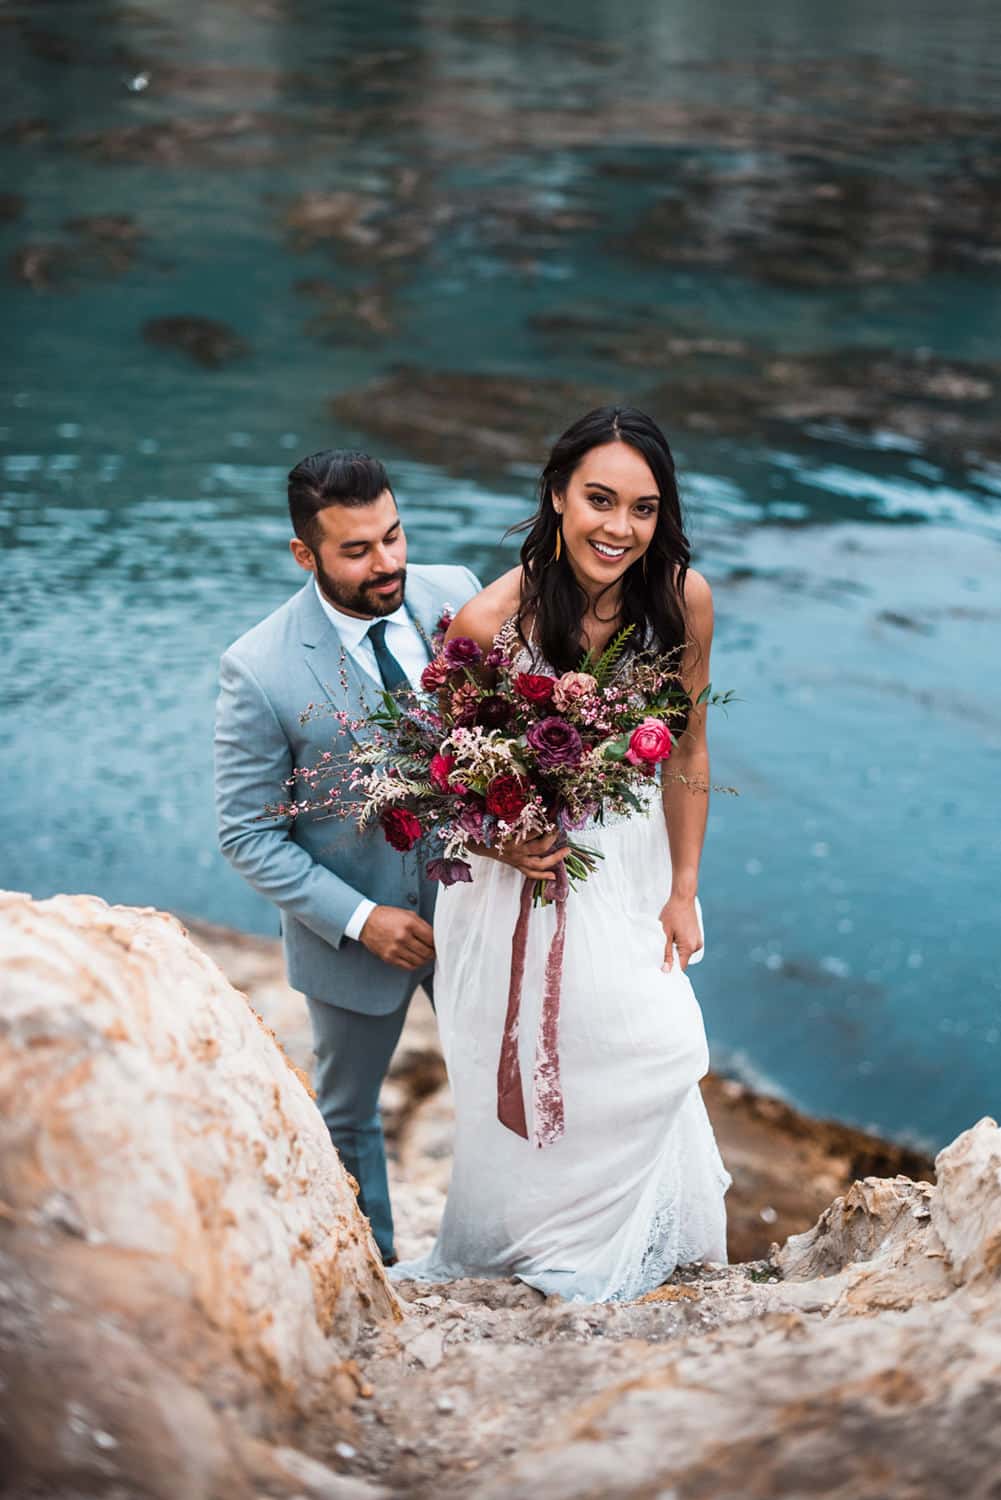 groom stands behind bride as she walks up rocky pathway holding a large bouquet of burgundy flowers